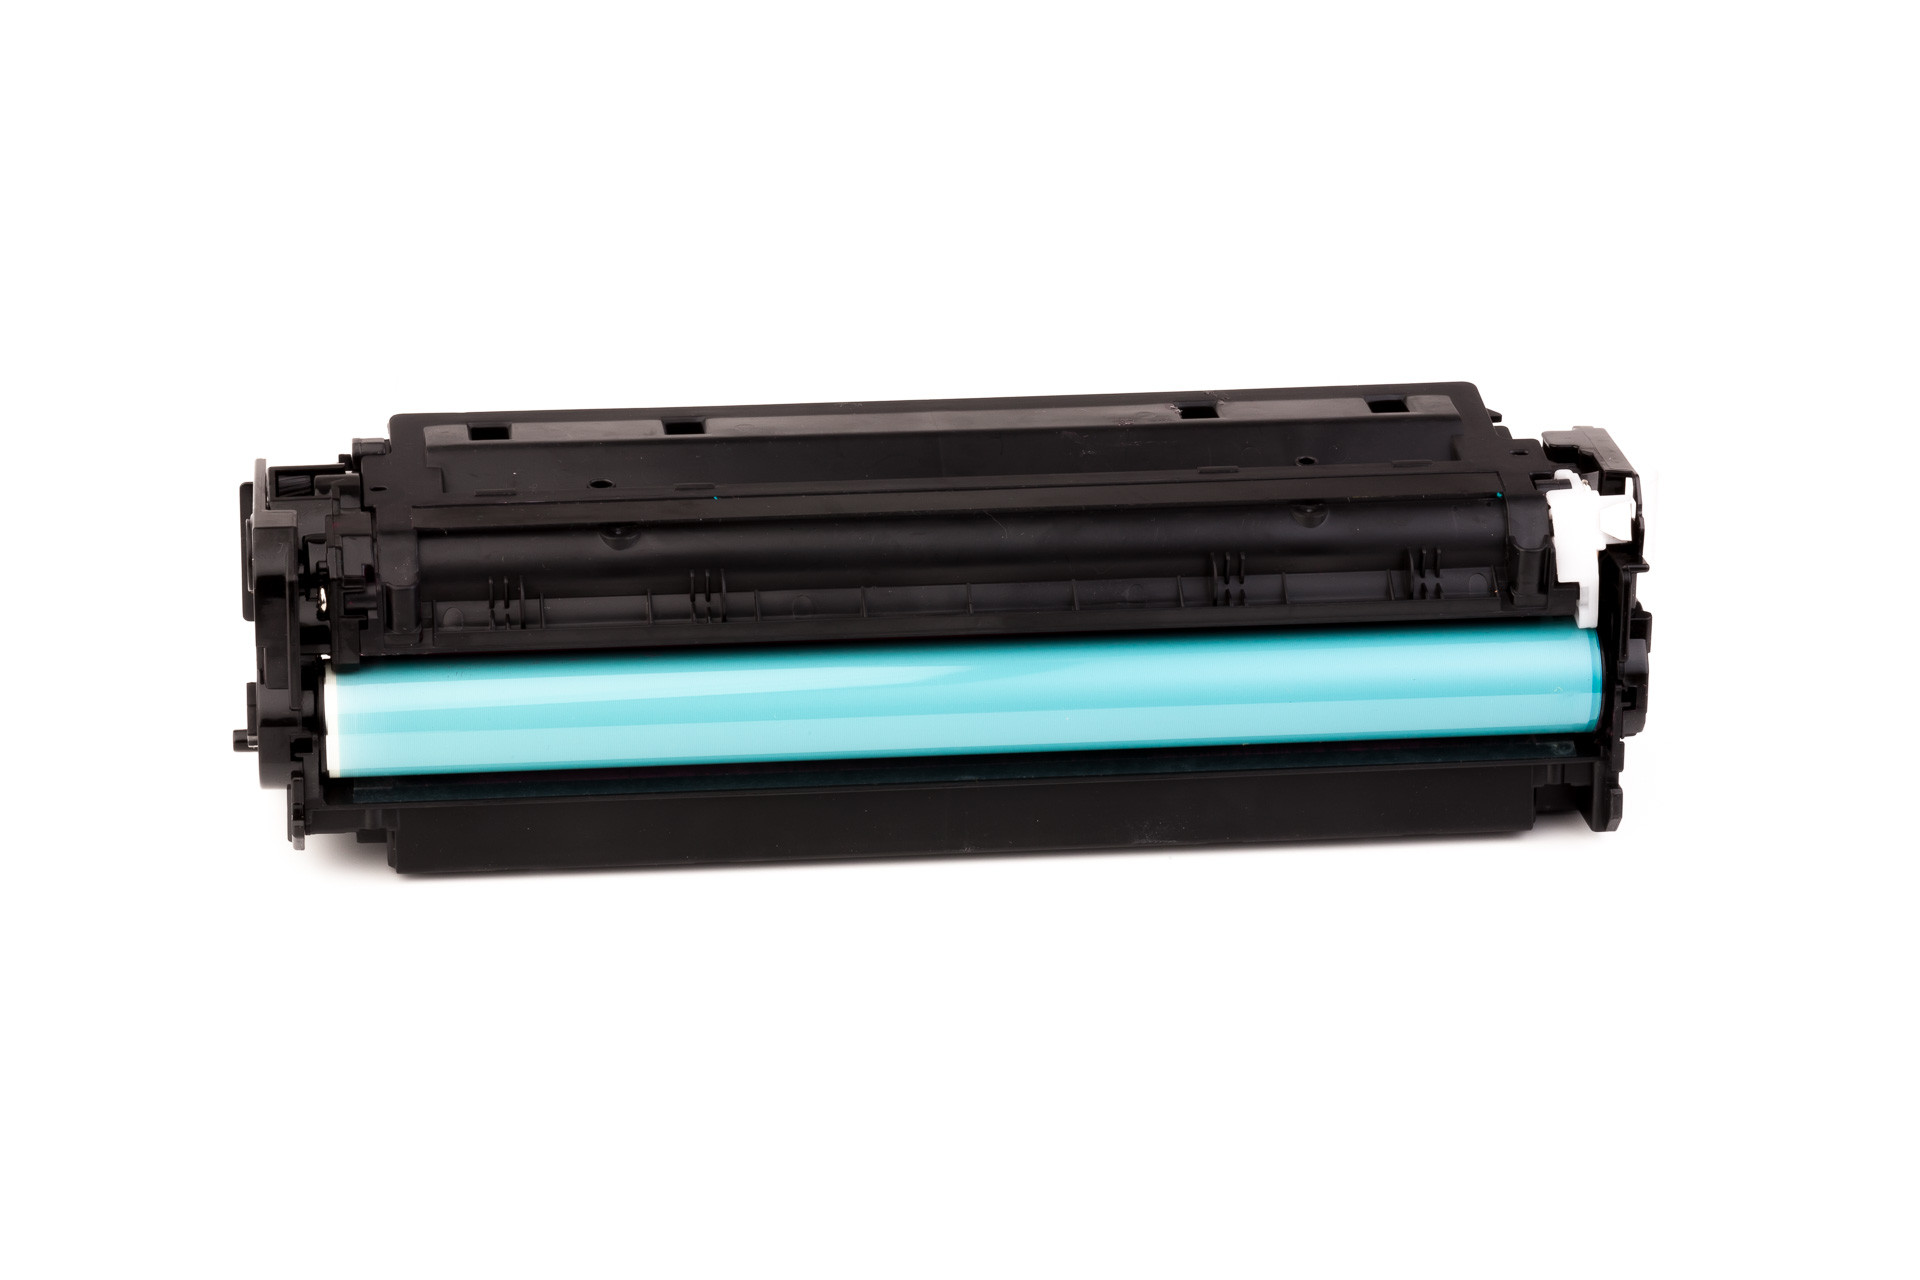 Toner cartridge (alternative) compatible with HP Color LJ CP2025  DN  N  X   CM2320 MFP FXI  N  NF   CM2720 MFP FXI  magenta